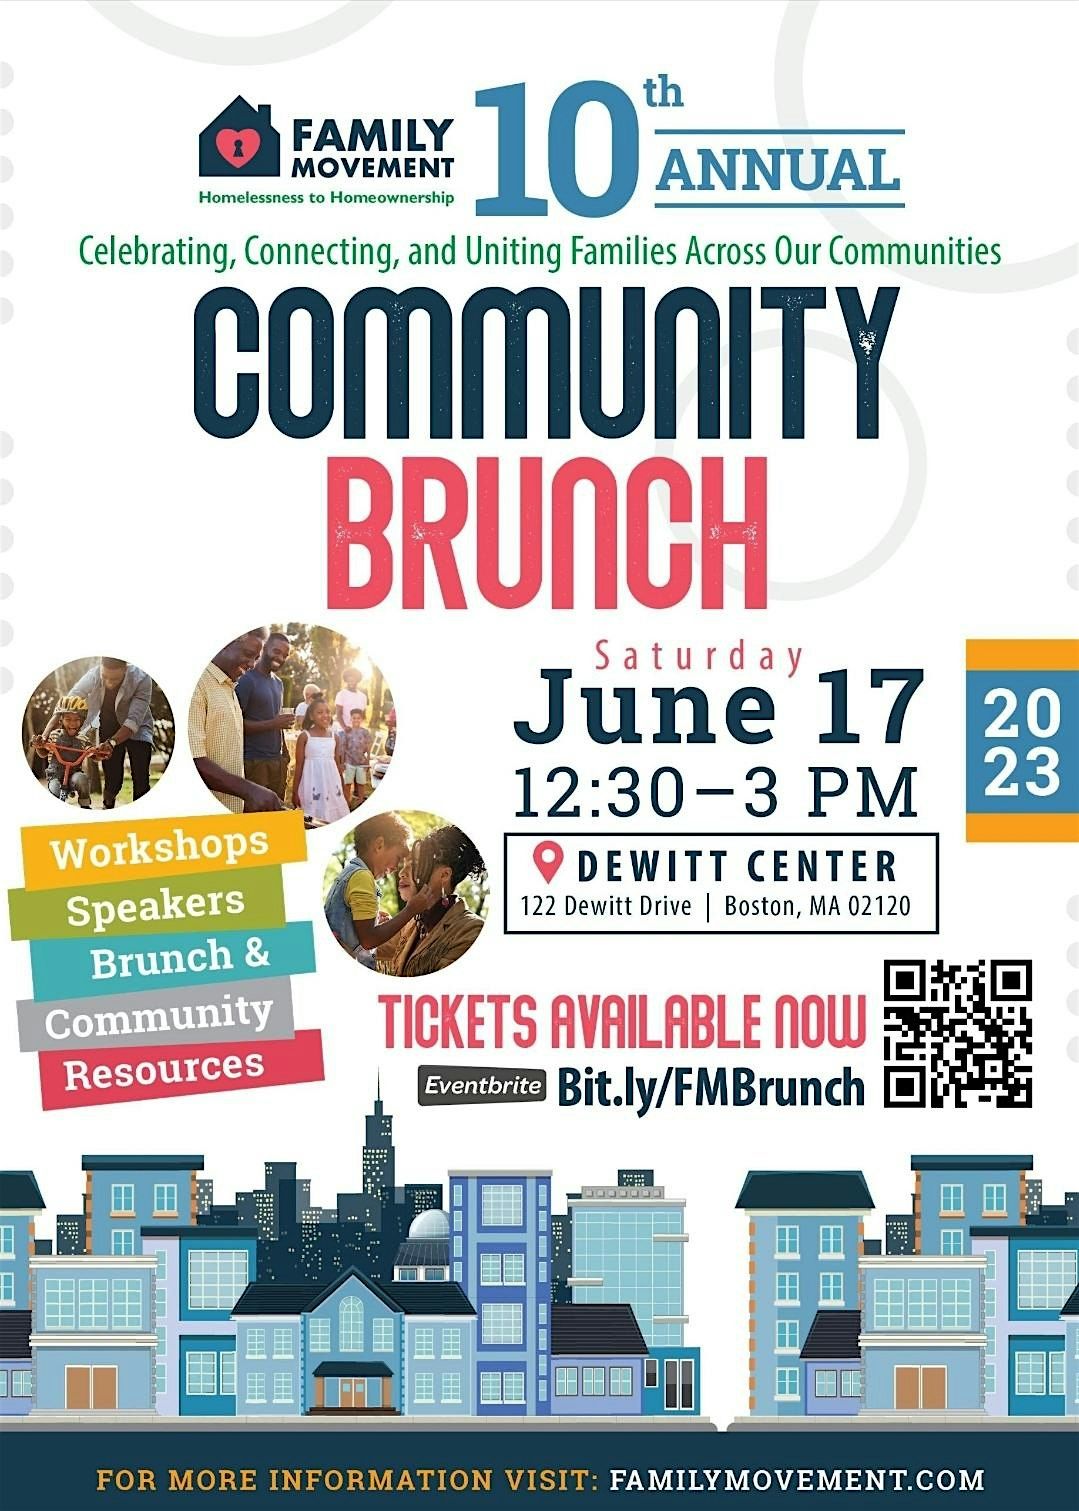 Family Movement presents  - Annual Community Brunch